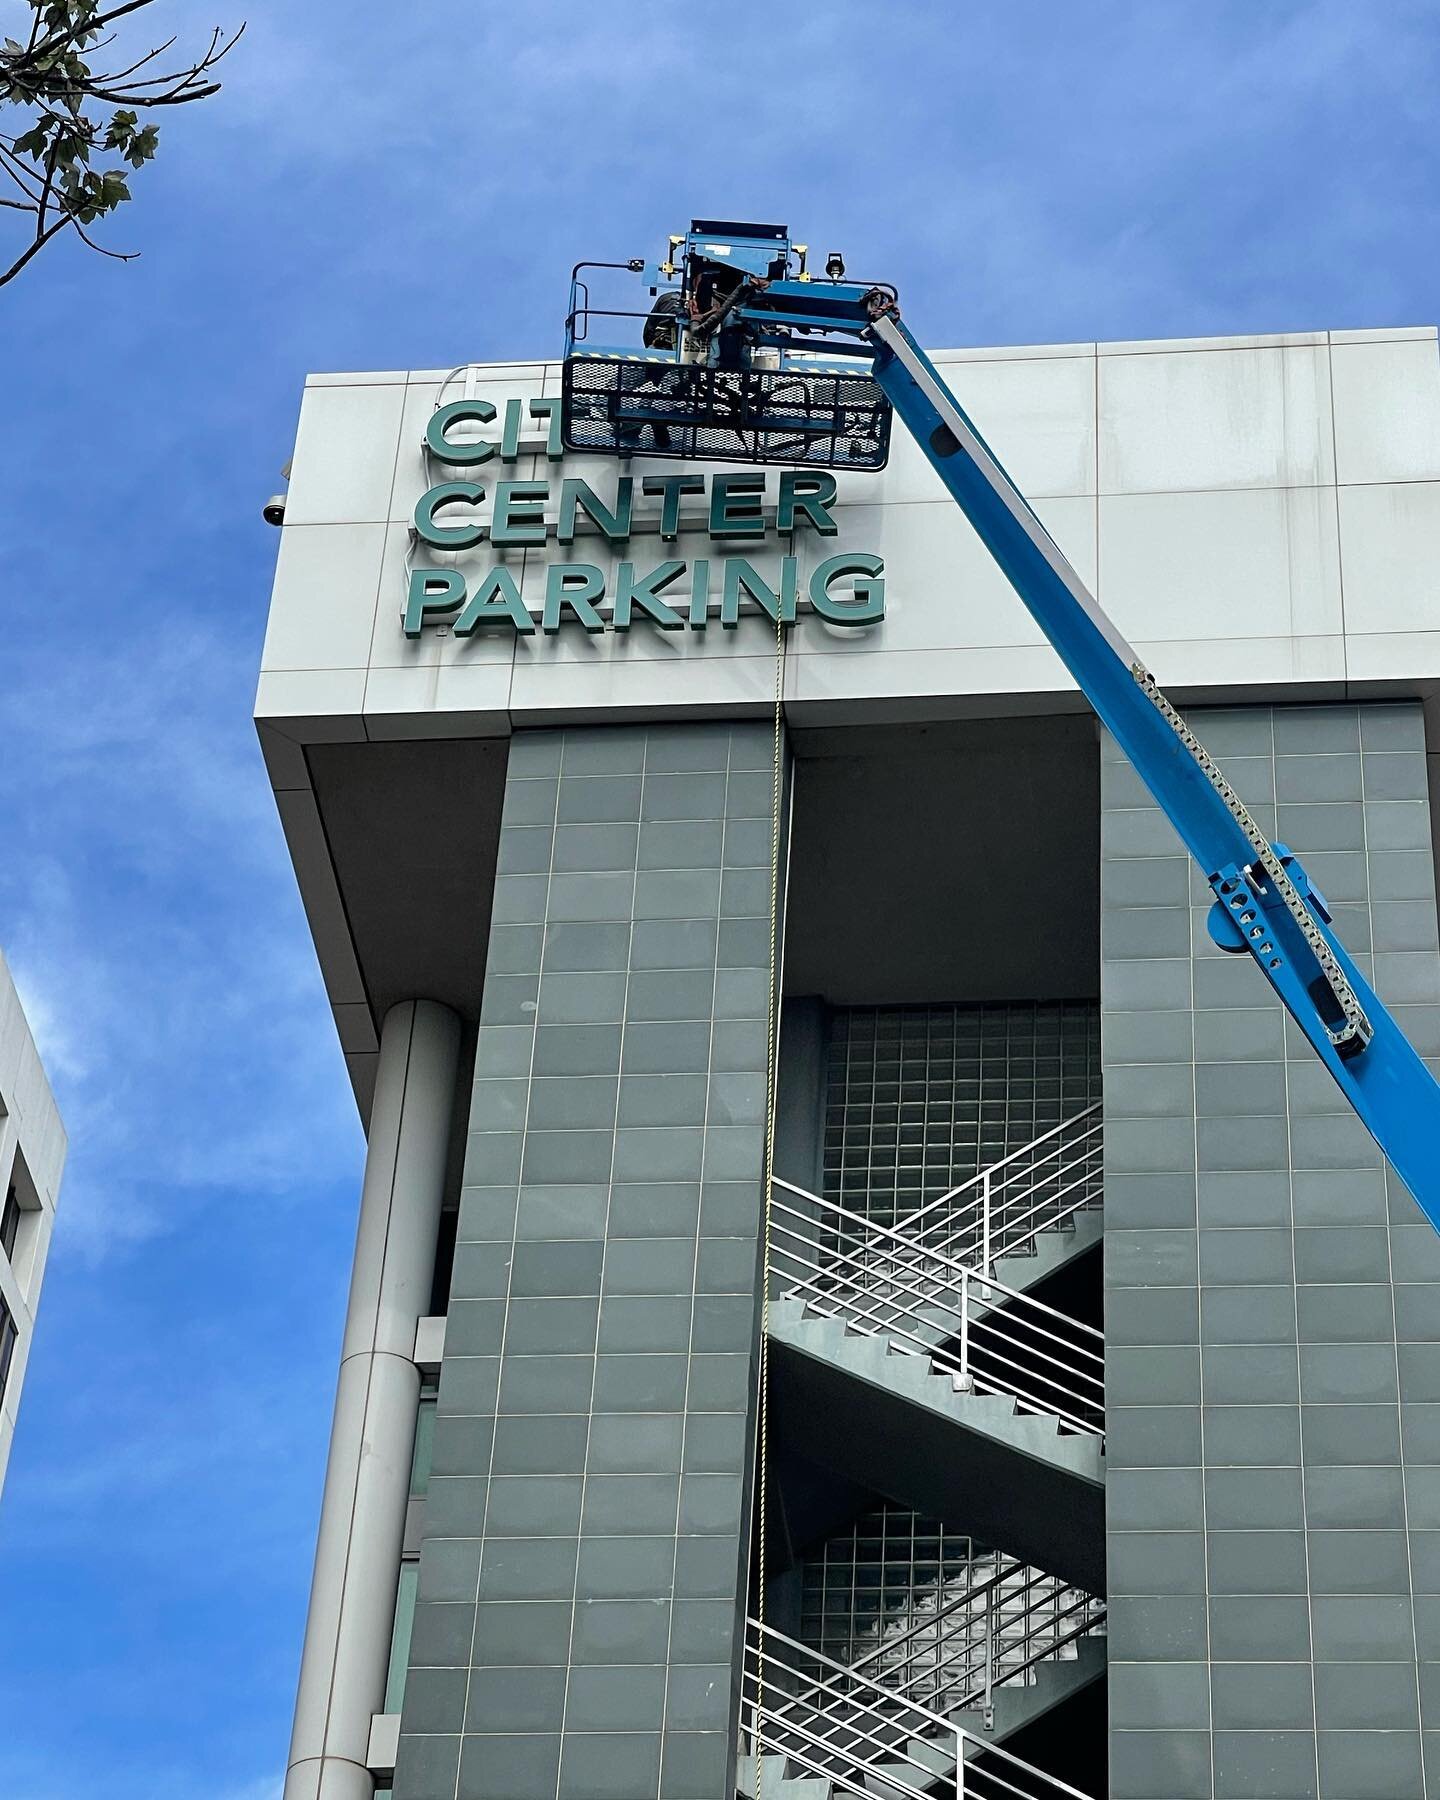 We happy to announce that the city of Raleigh entrusted us with the replacement of the entire lighting system and building sign for the government center parking garage, we started yesterday with the replacement of the sign, not every day you get to 